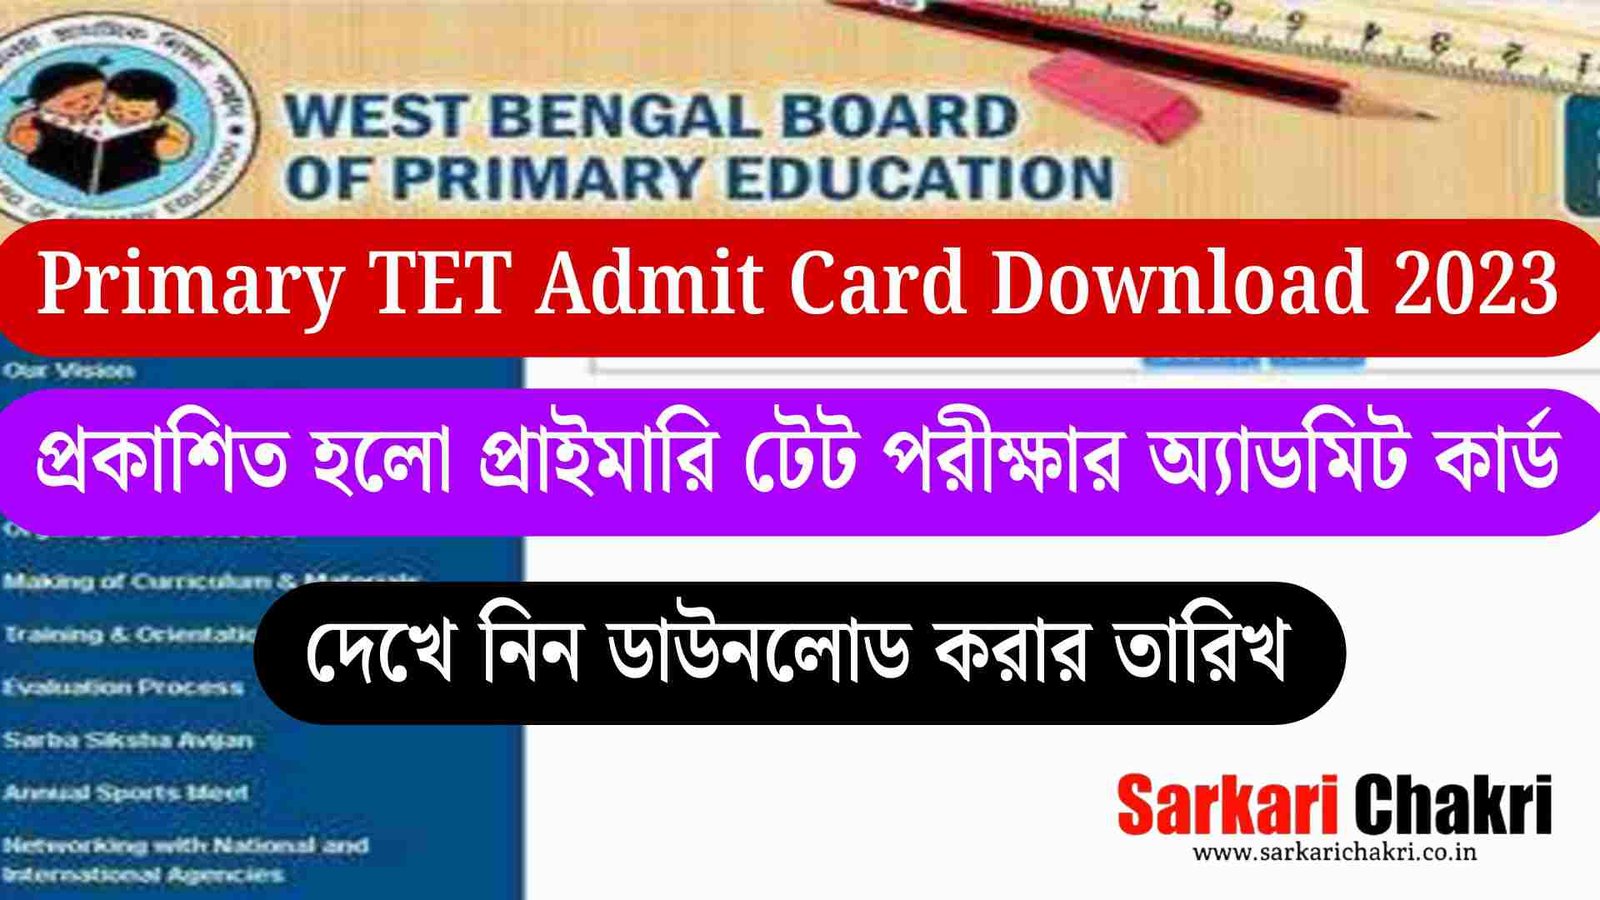 Primary TET Admit Card Download Release Date 2023